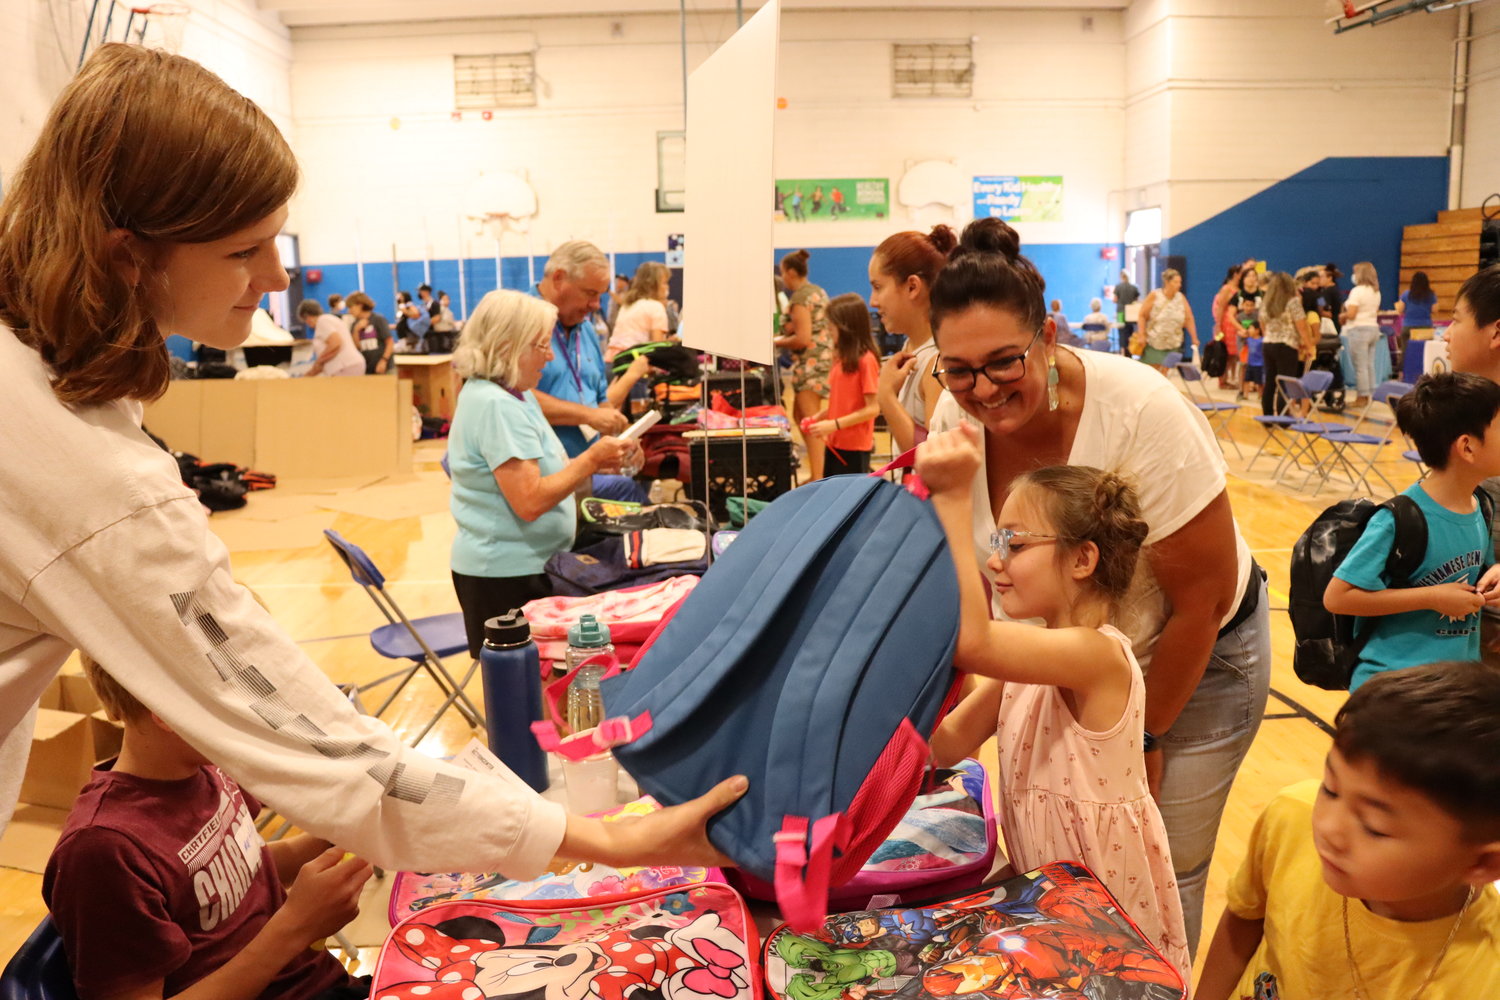 Volunteers and community members come together at the annual school supply distribution event hosted by the Action Center. This year's event was held at Everitt Middle School in Wheat Ridge.